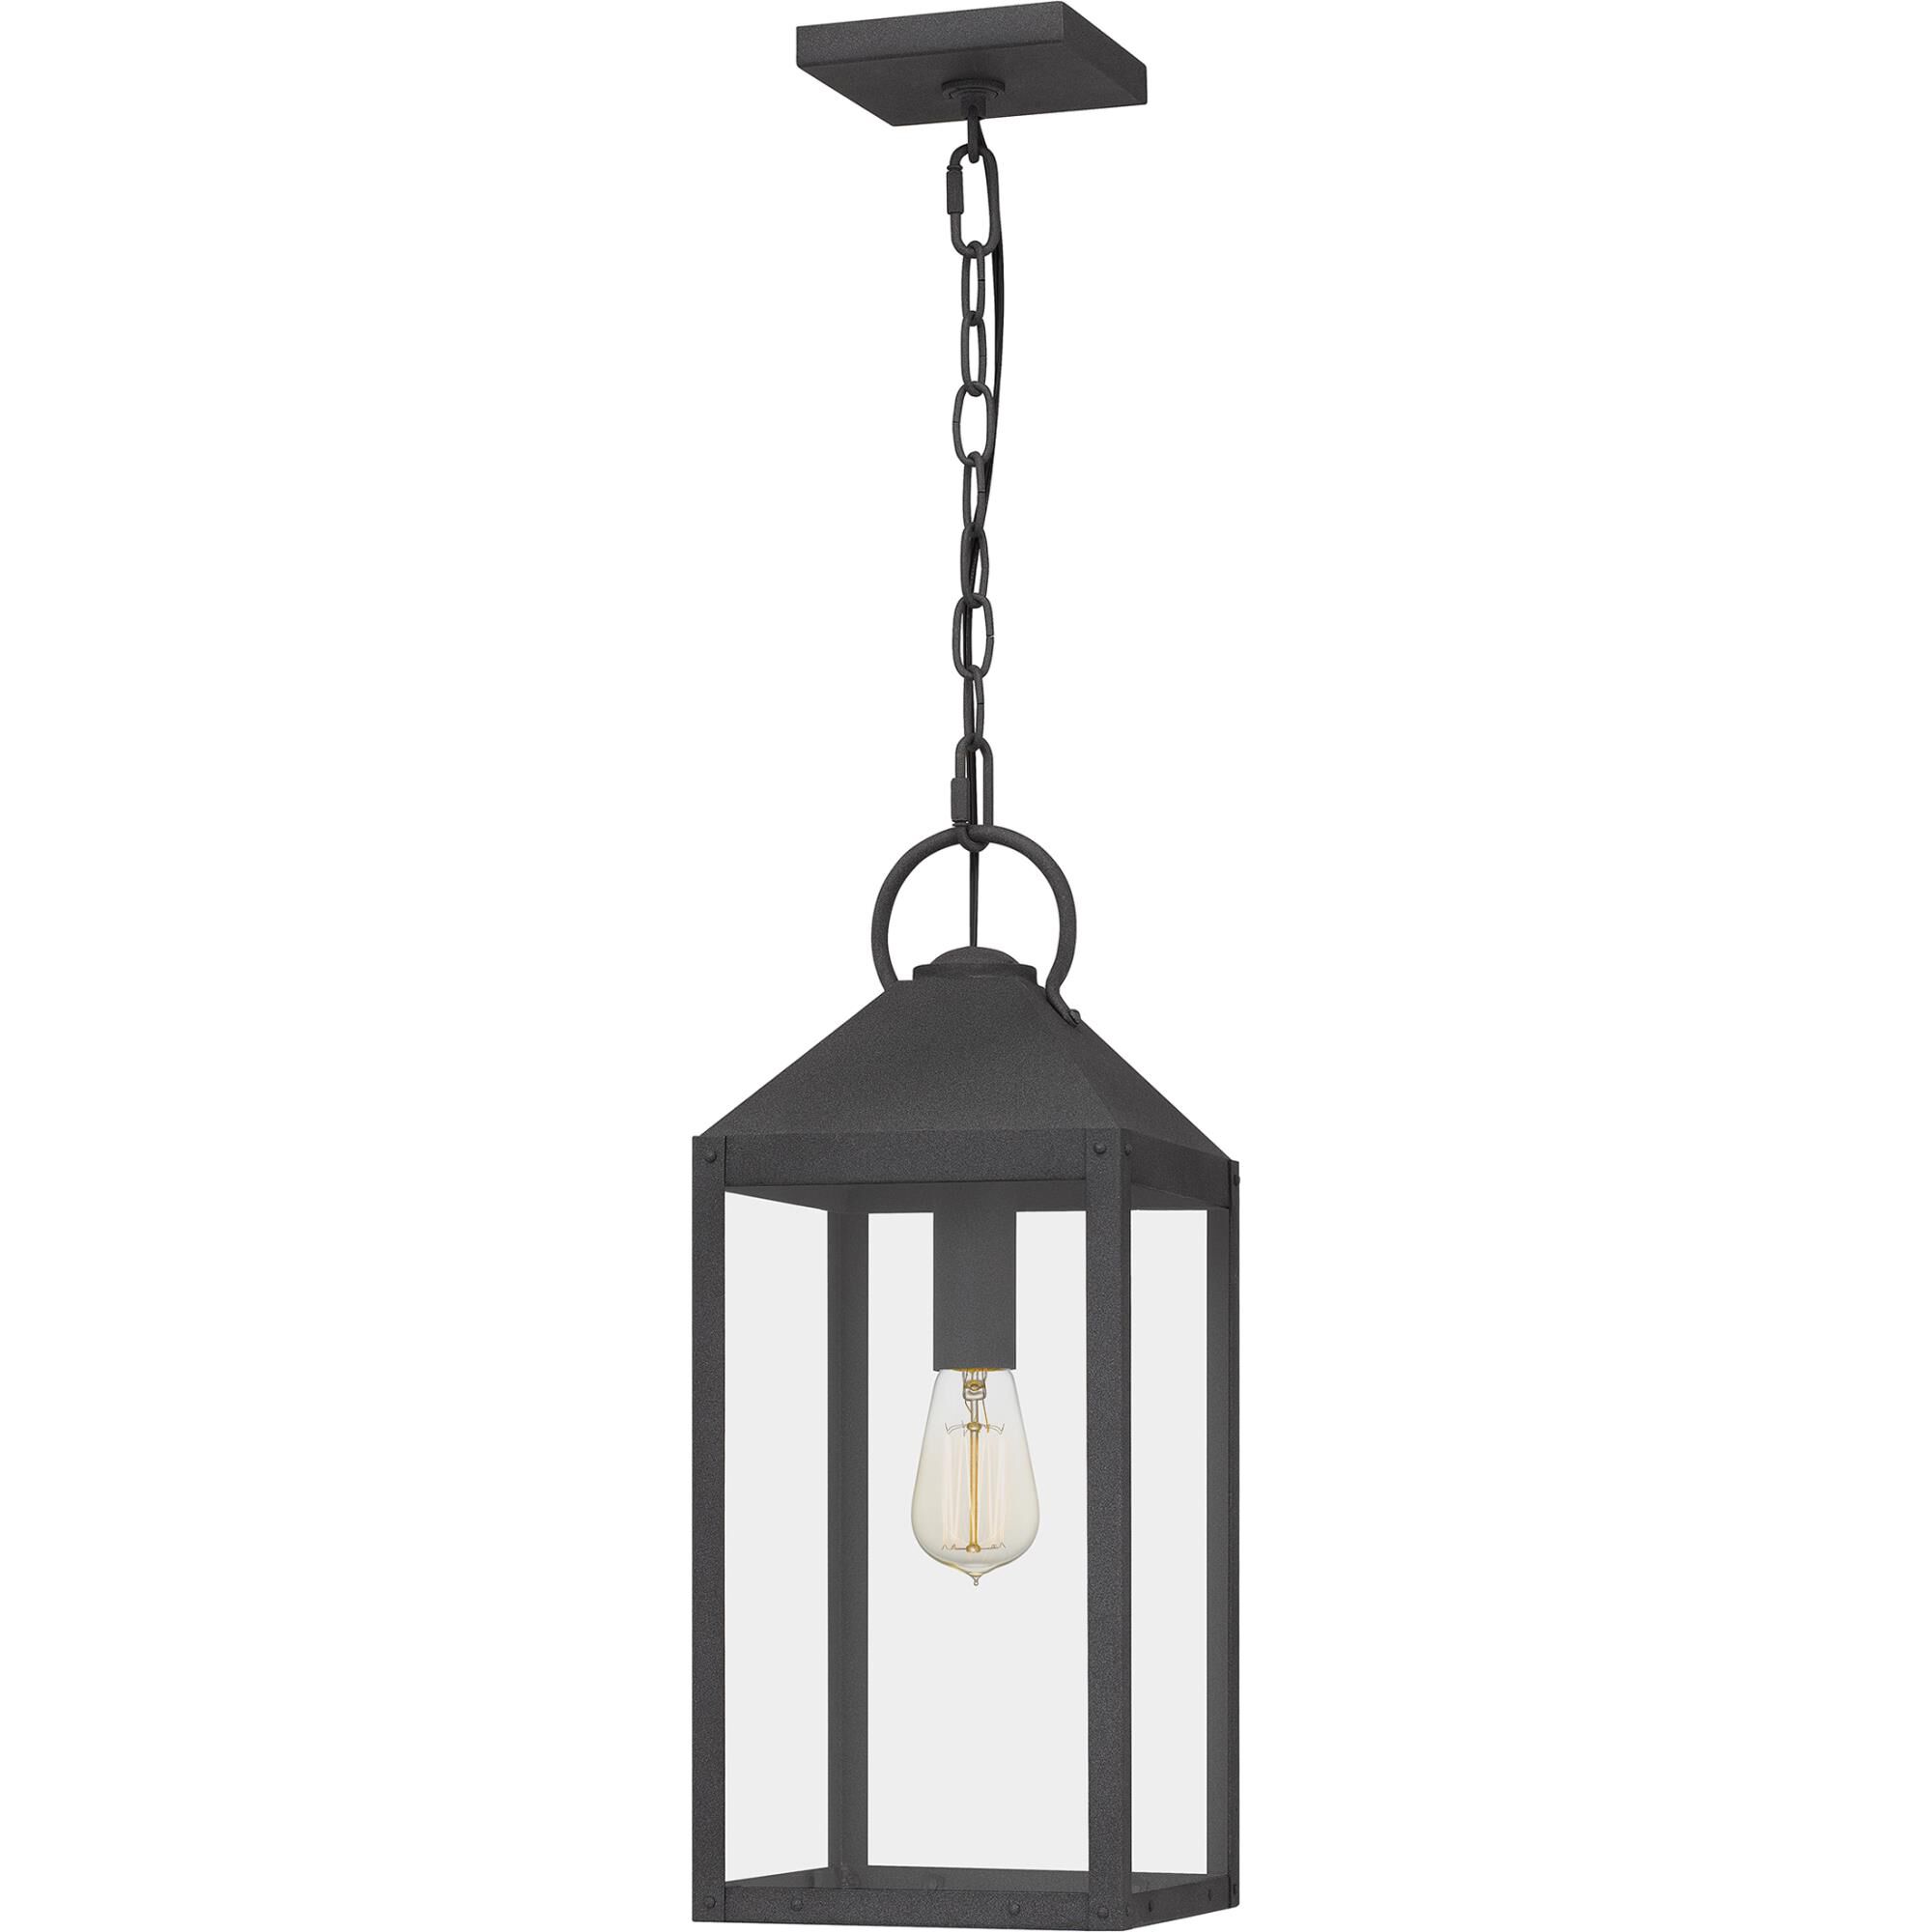 Photos - Chandelier / Lamp Quoizel Thorpe 19 Inch Tall Outdoor Hanging Lantern Thorpe - TPE1908MB - T 